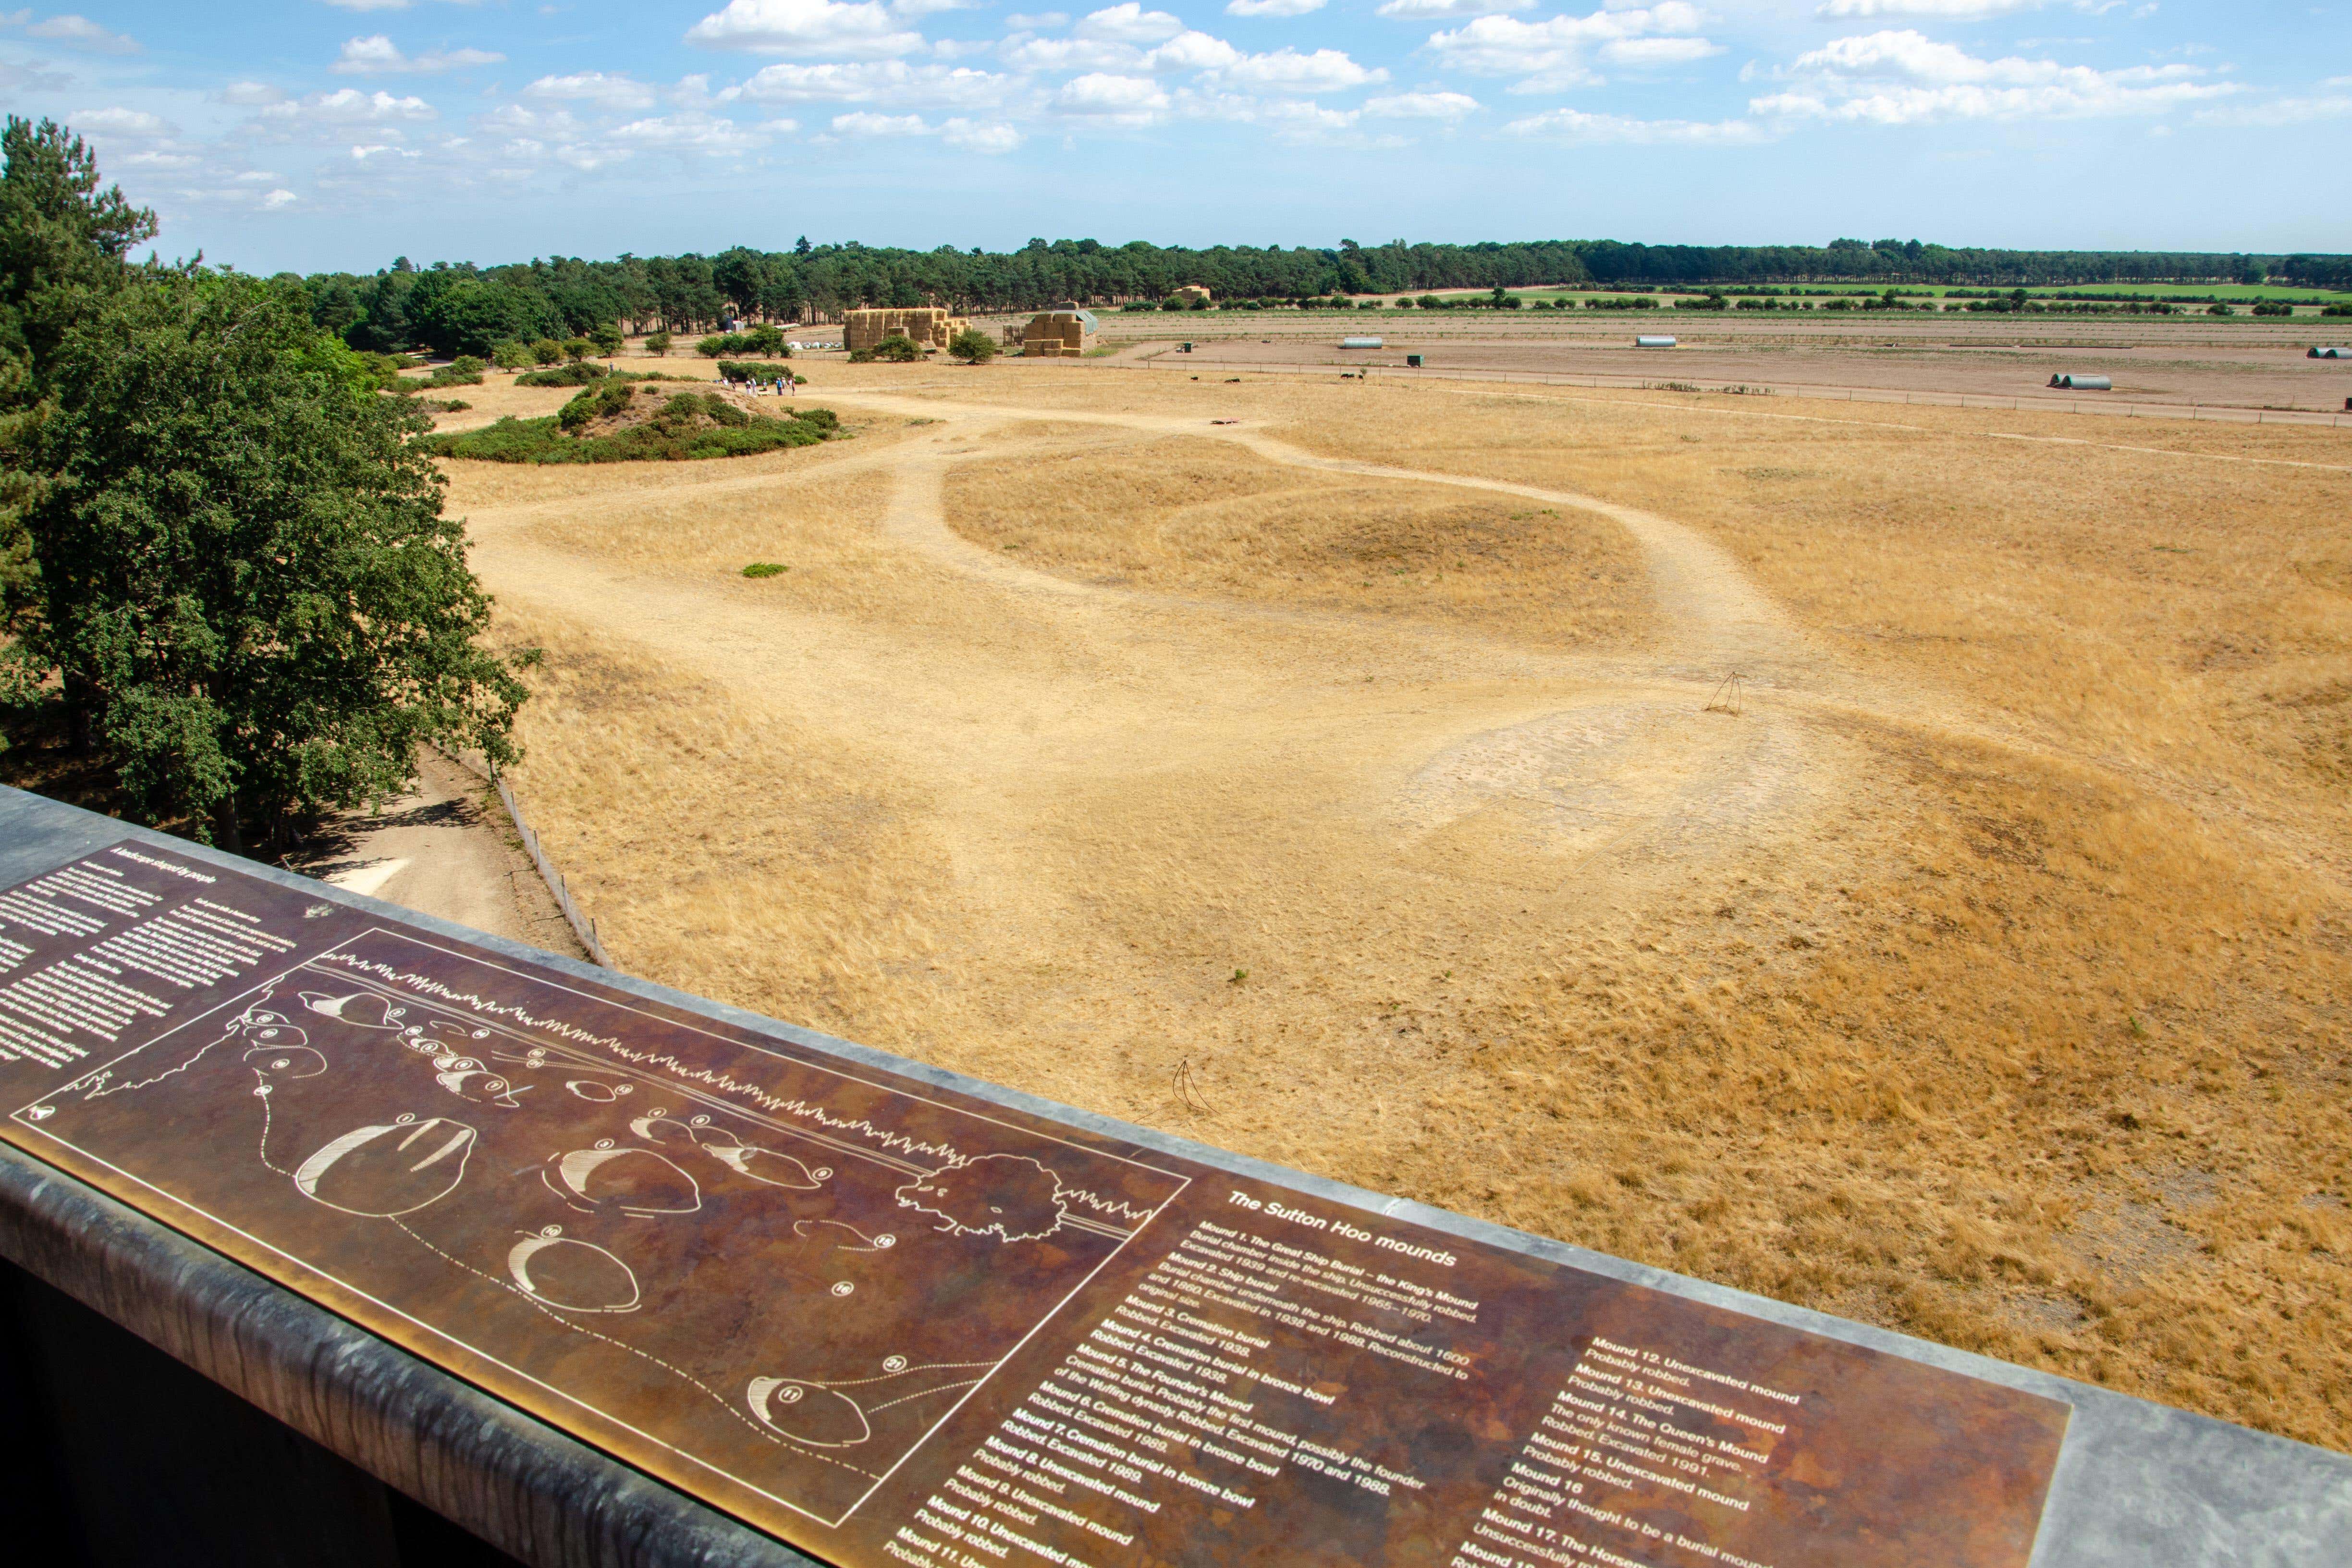 The Royal Burial Ground at Sutton Hoo (Alamy/PA)